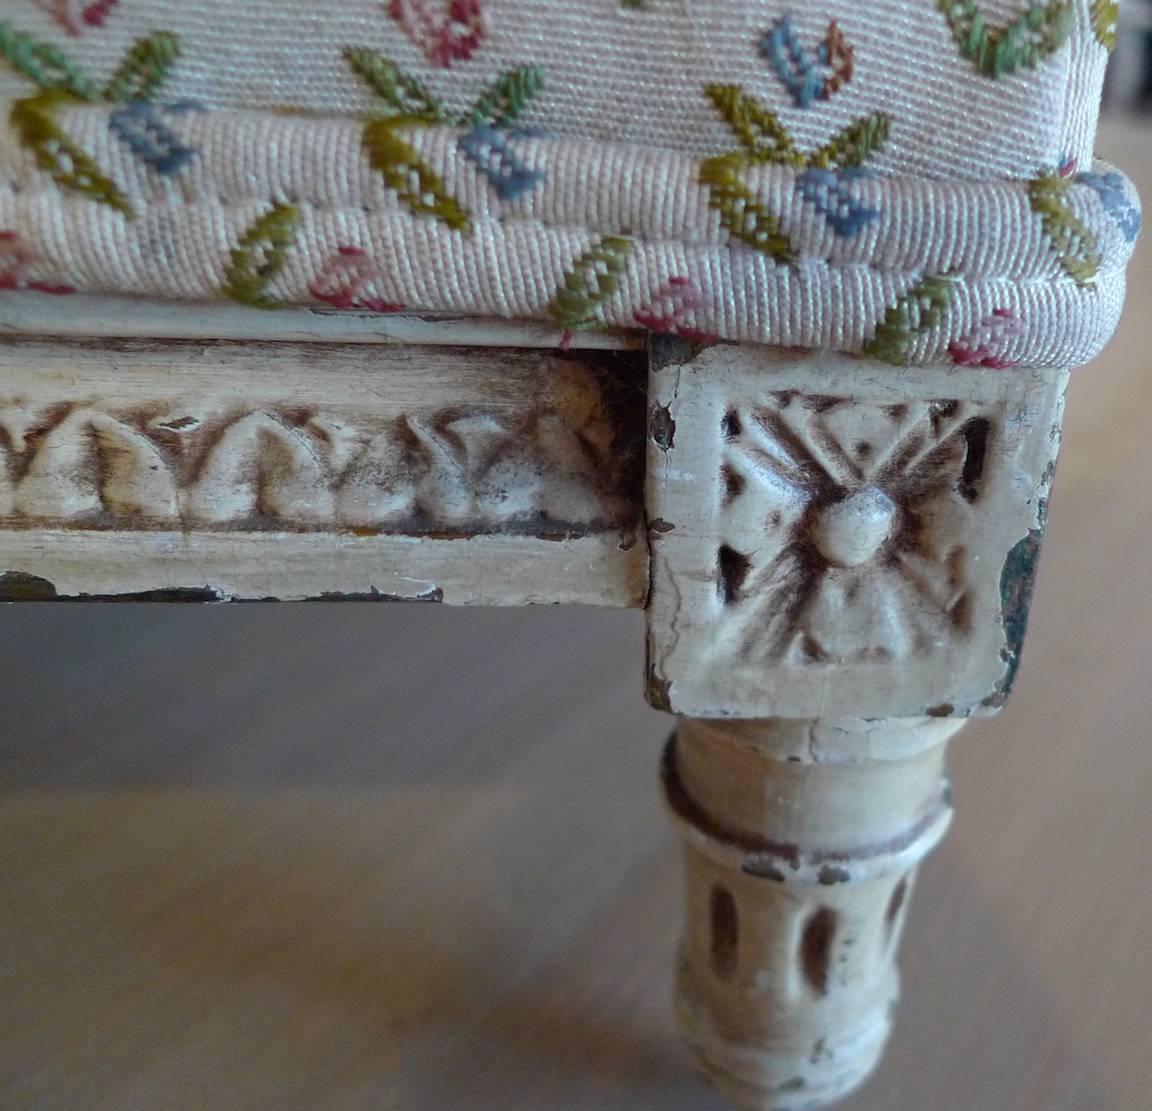 French 19th Century Four-Leg Foot Stool Newly Re-Upholstered with Vintage Fabric (19. Jahrhundert)